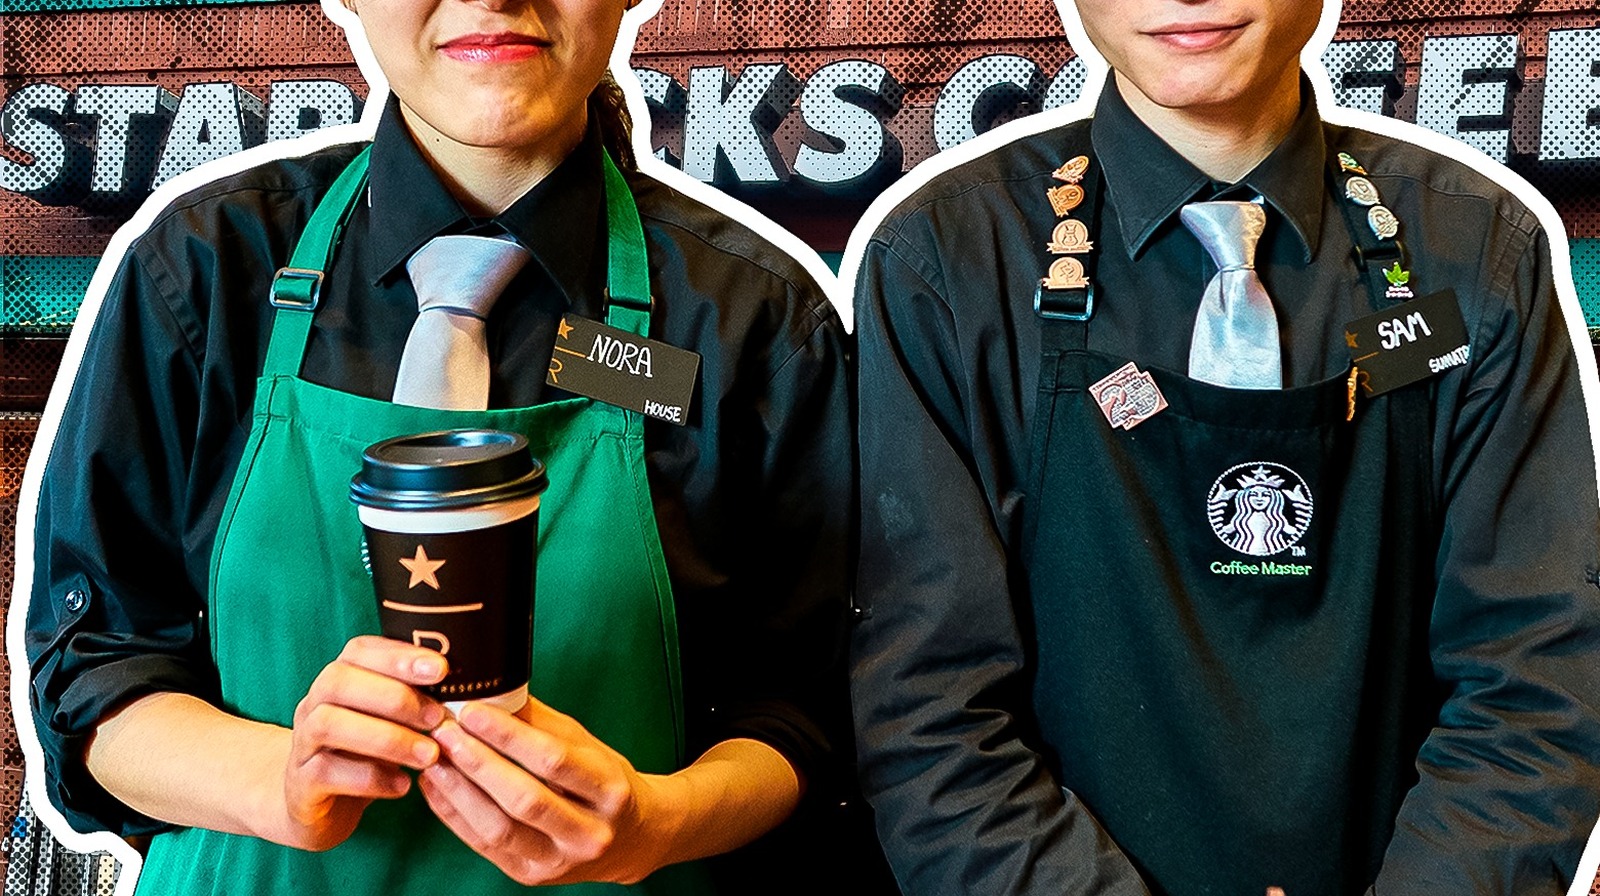 For everyone asking about the dress code : r/starbucks